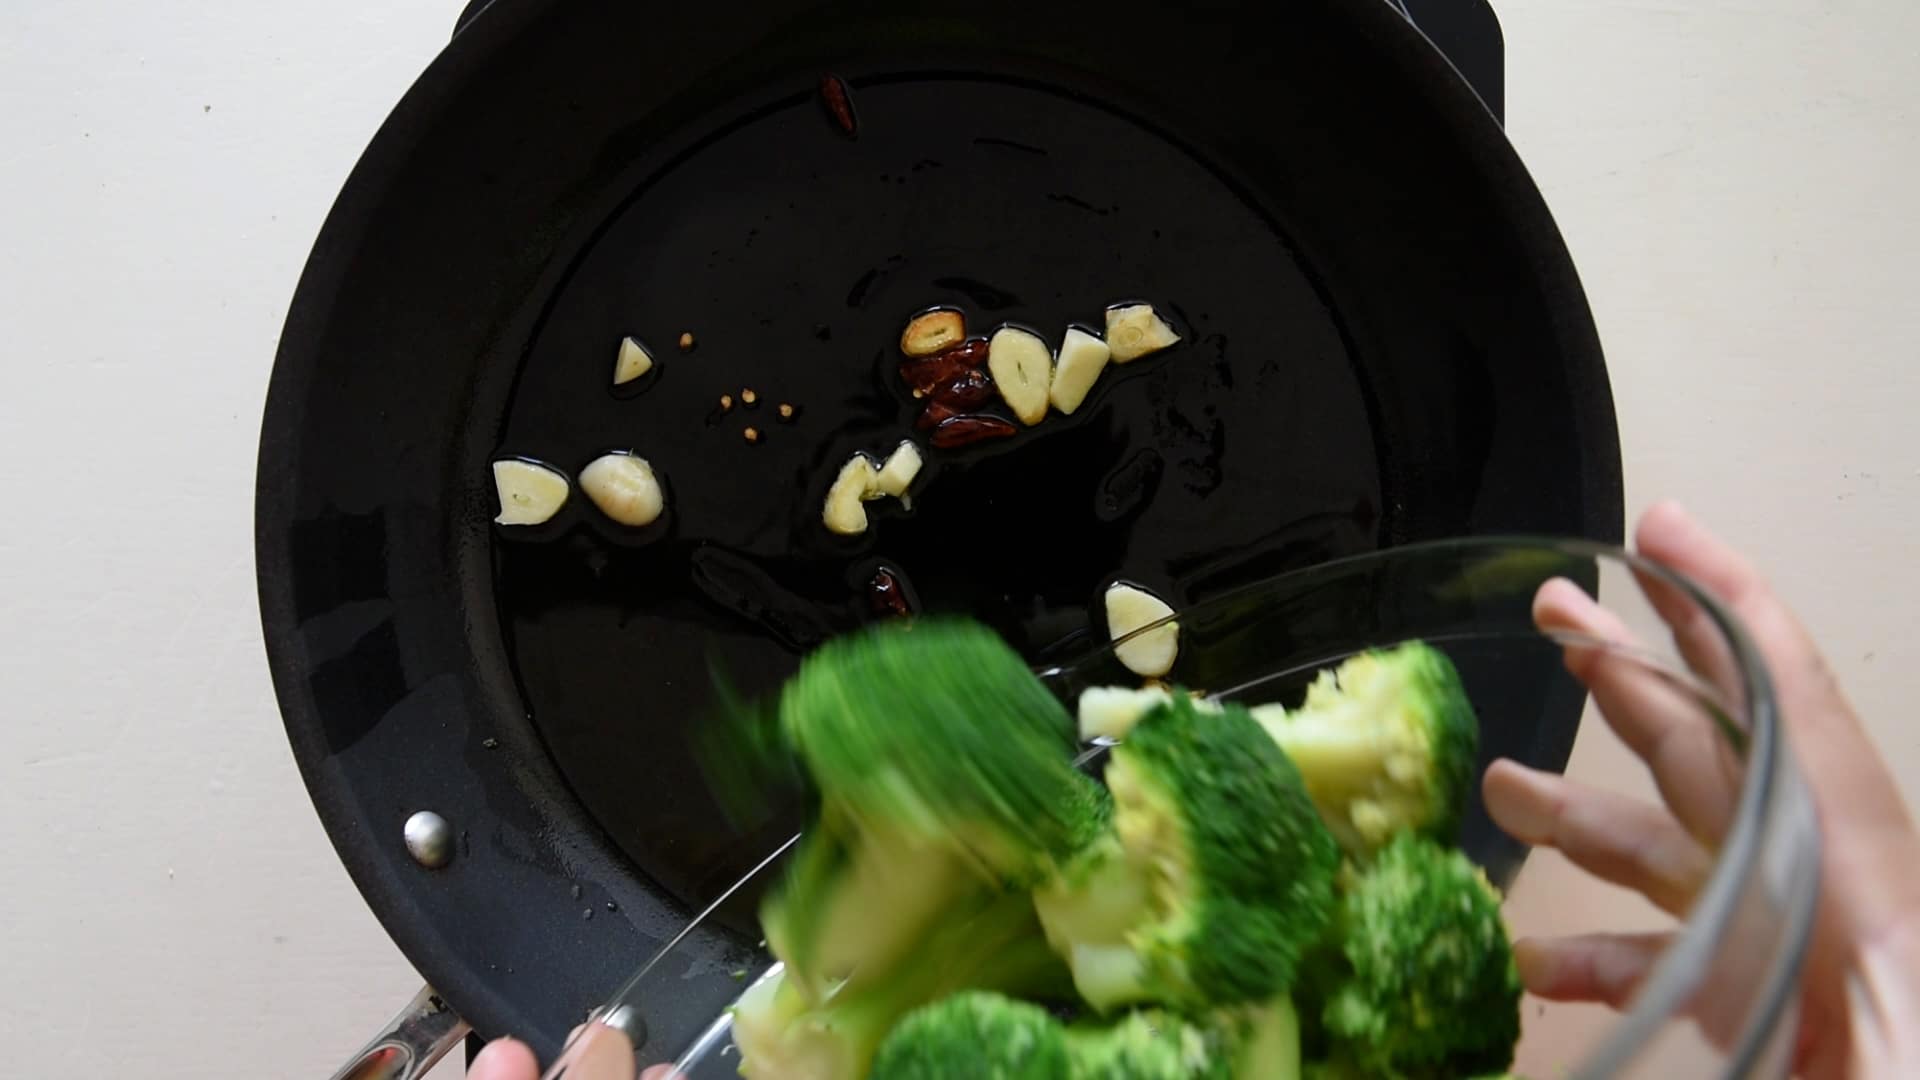 Add the broccoli to the frying pan